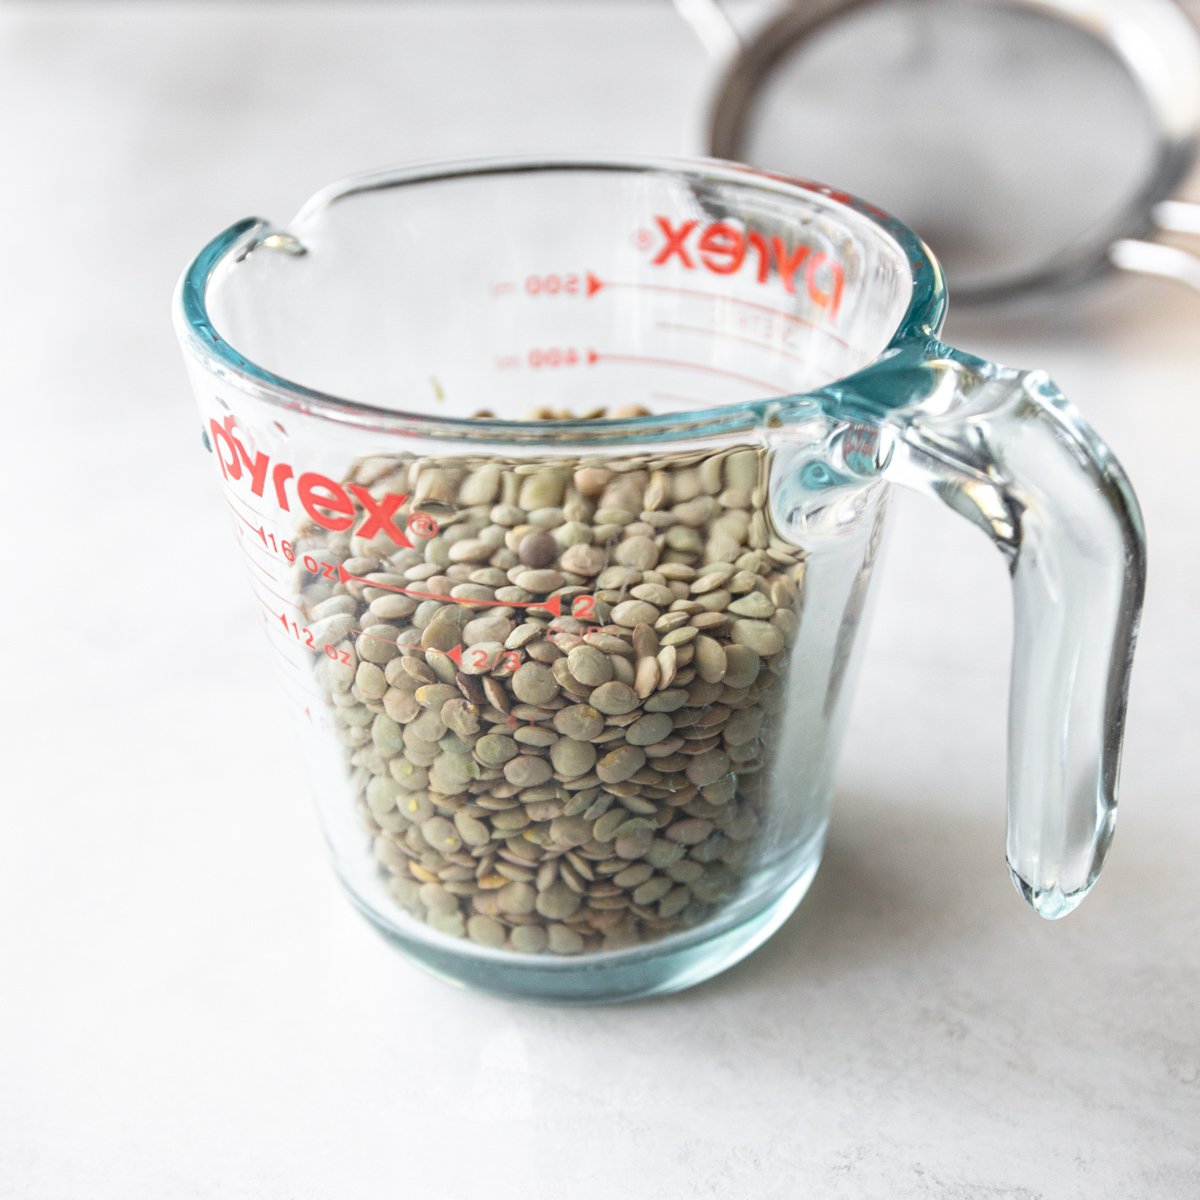 uncooked lentils in a clear glass measuring cup